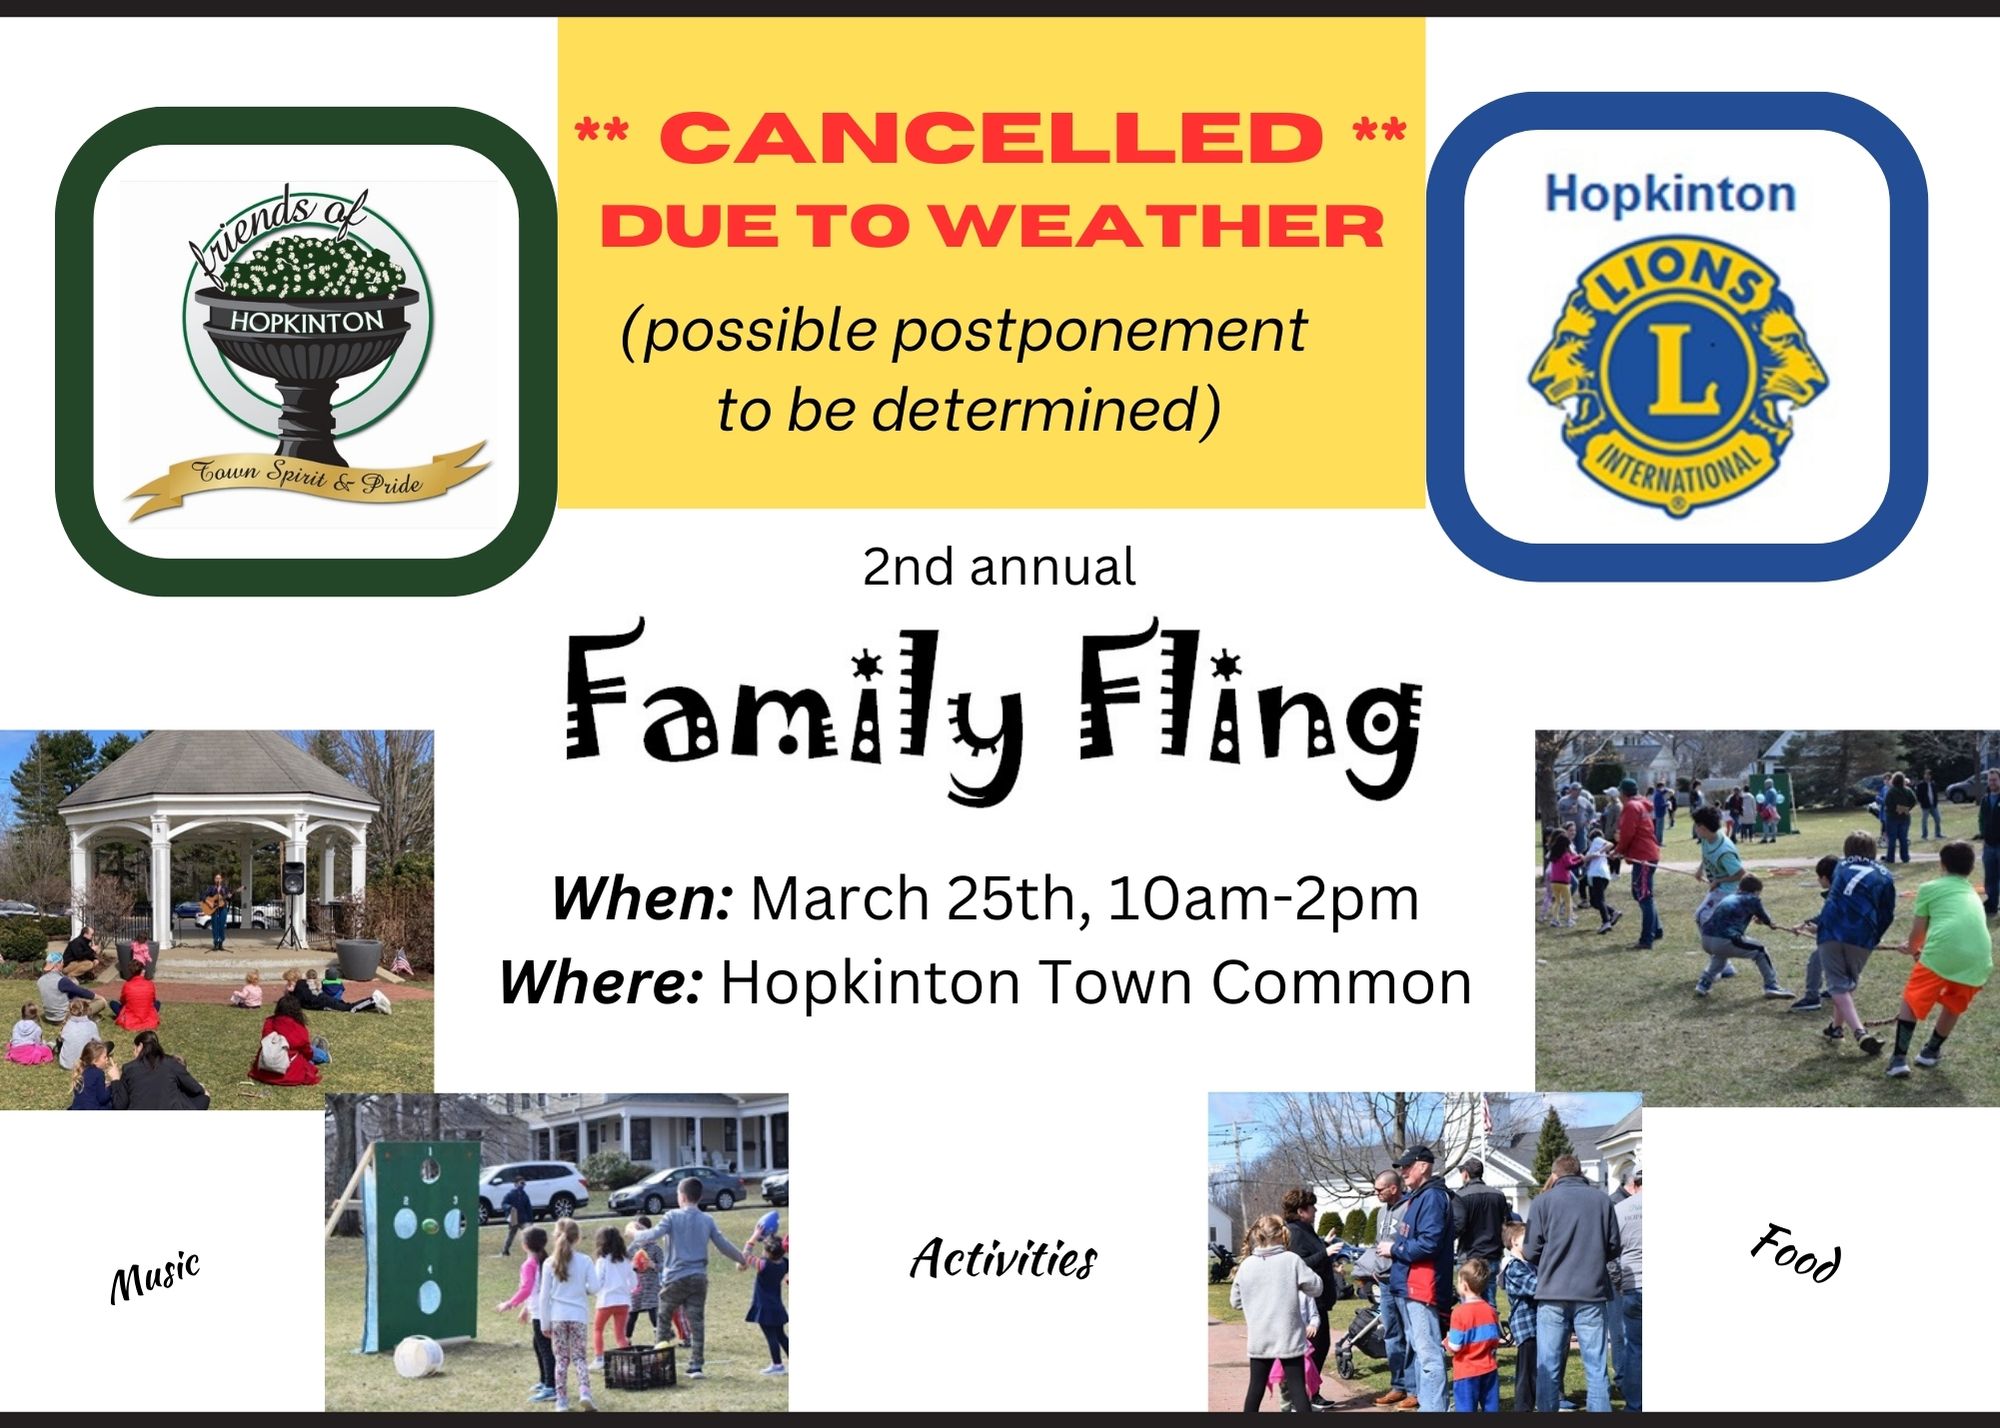 Saturday’s Family Fling event canceled due to expected rain